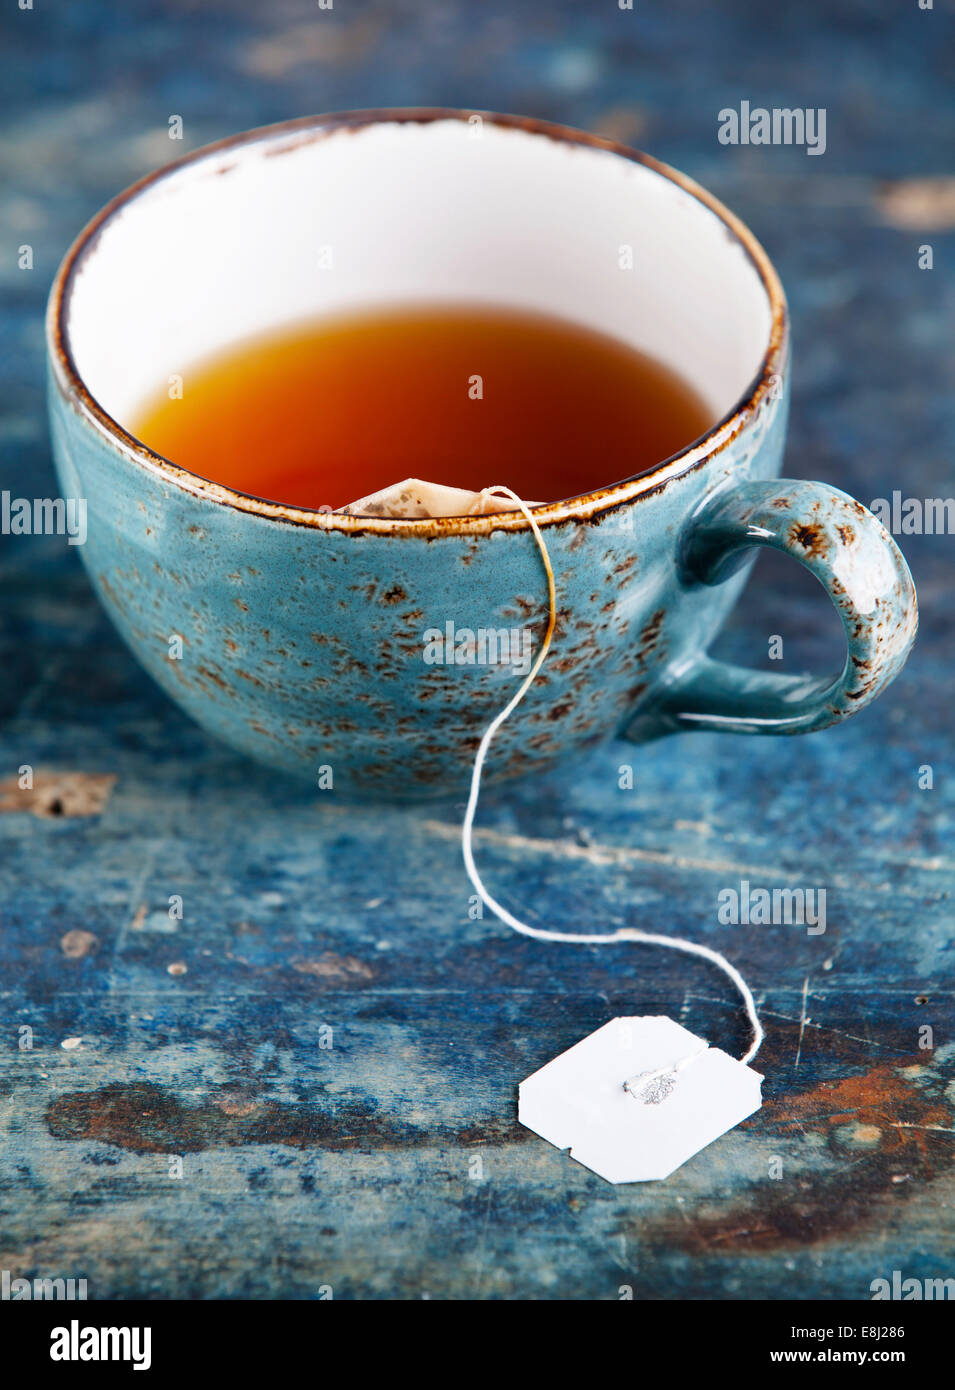 Cup of tea with teabag on blue textured background Stock Photo